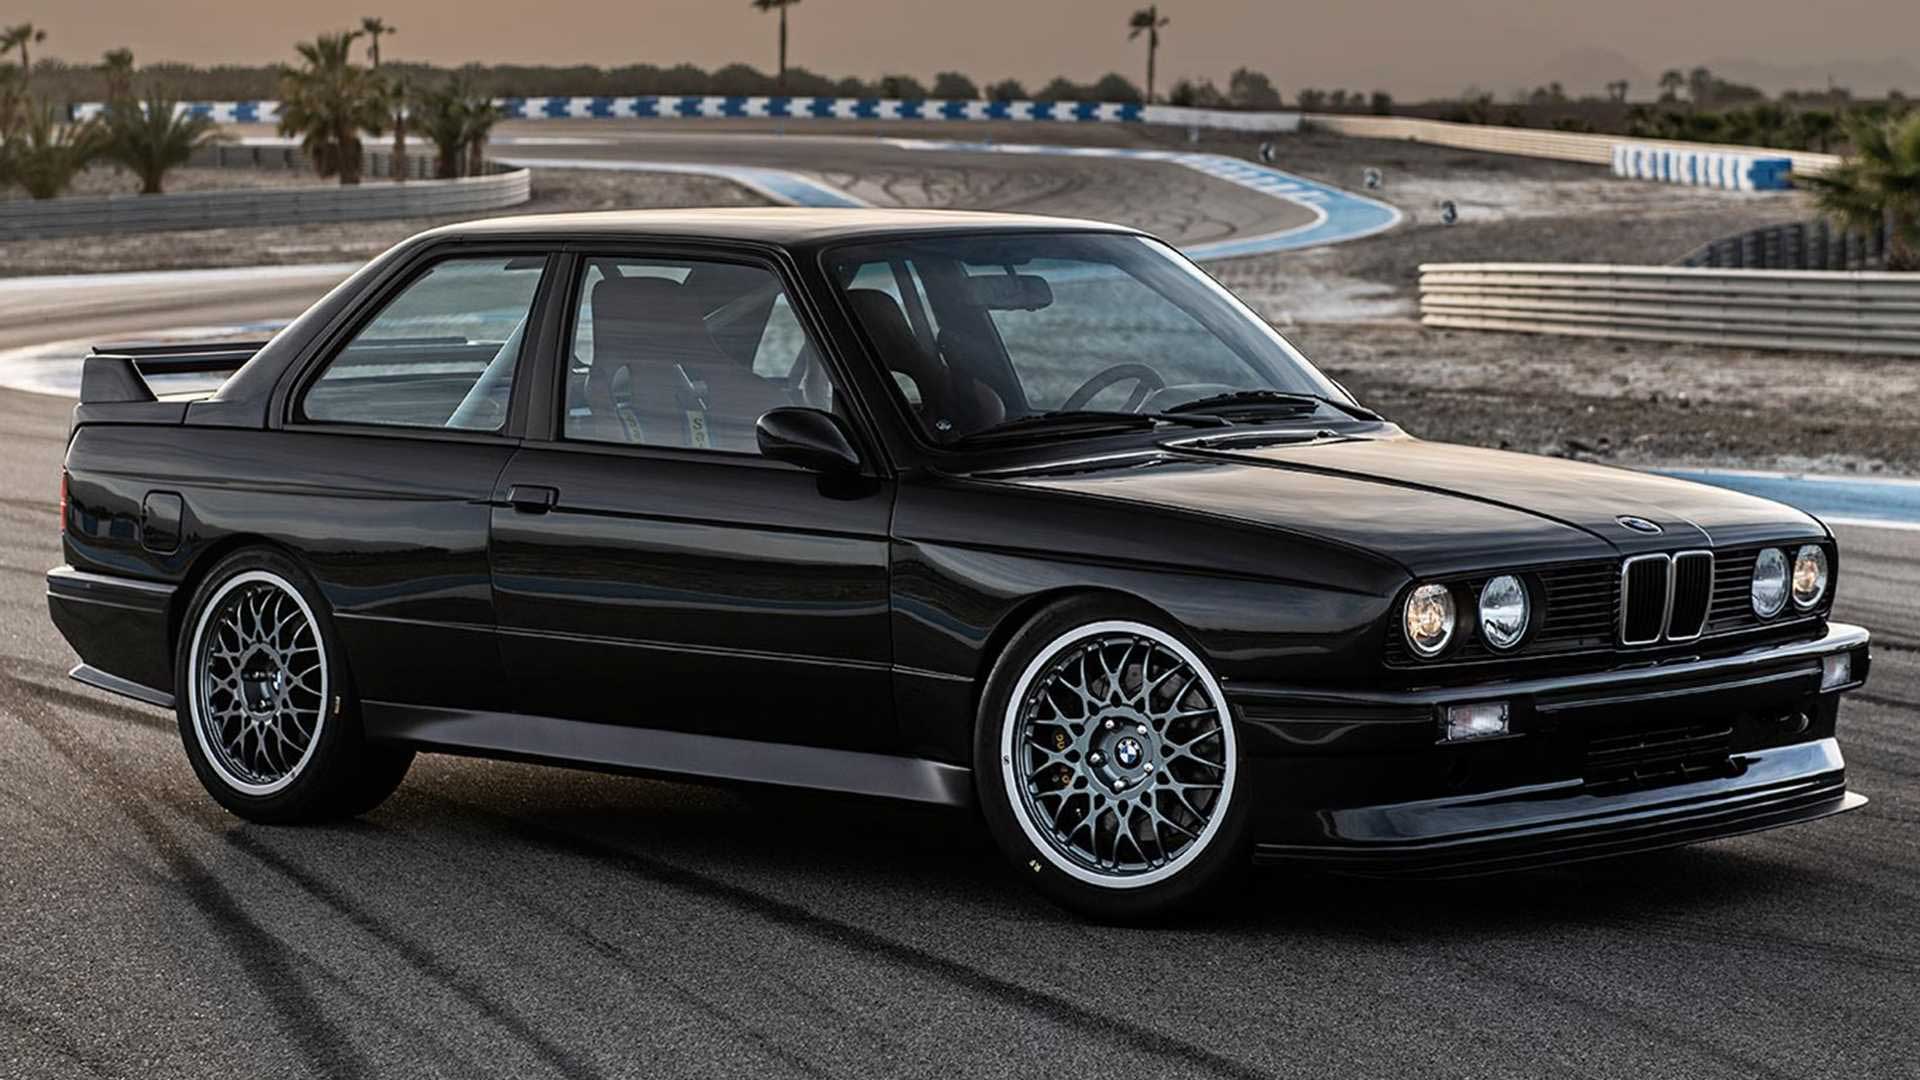 $350,000 BMW E30 M3 Build Packs an M5 V10 With 625 HP